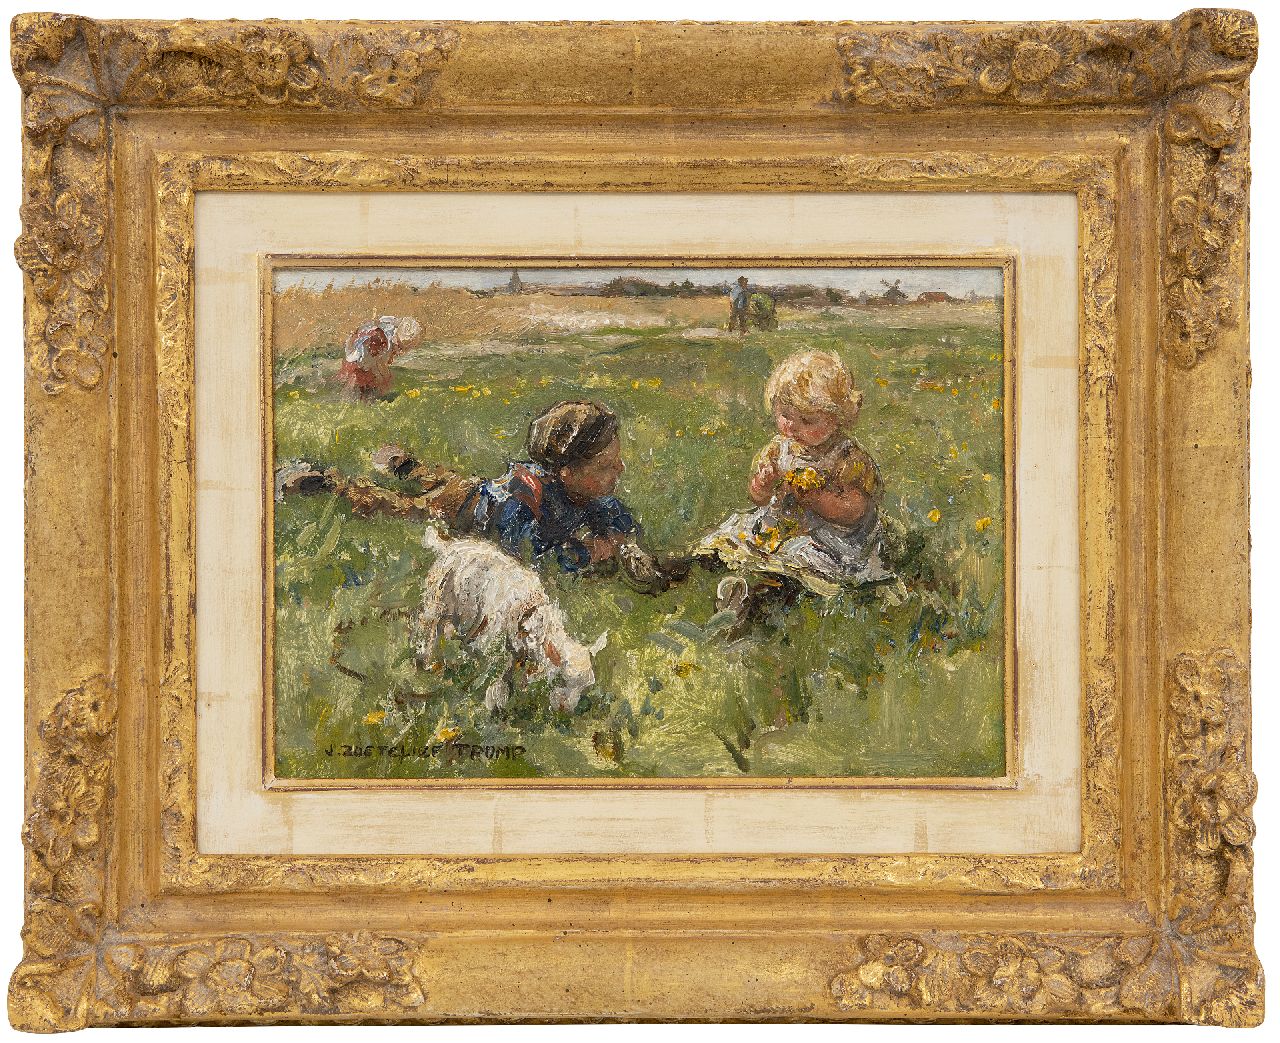 Zoetelief Tromp J.  | Johannes 'Jan' Zoetelief Tromp | Paintings offered for sale | Children playing in the meadow, oil on panel 18.9 x 26.6 cm, signed l.l.